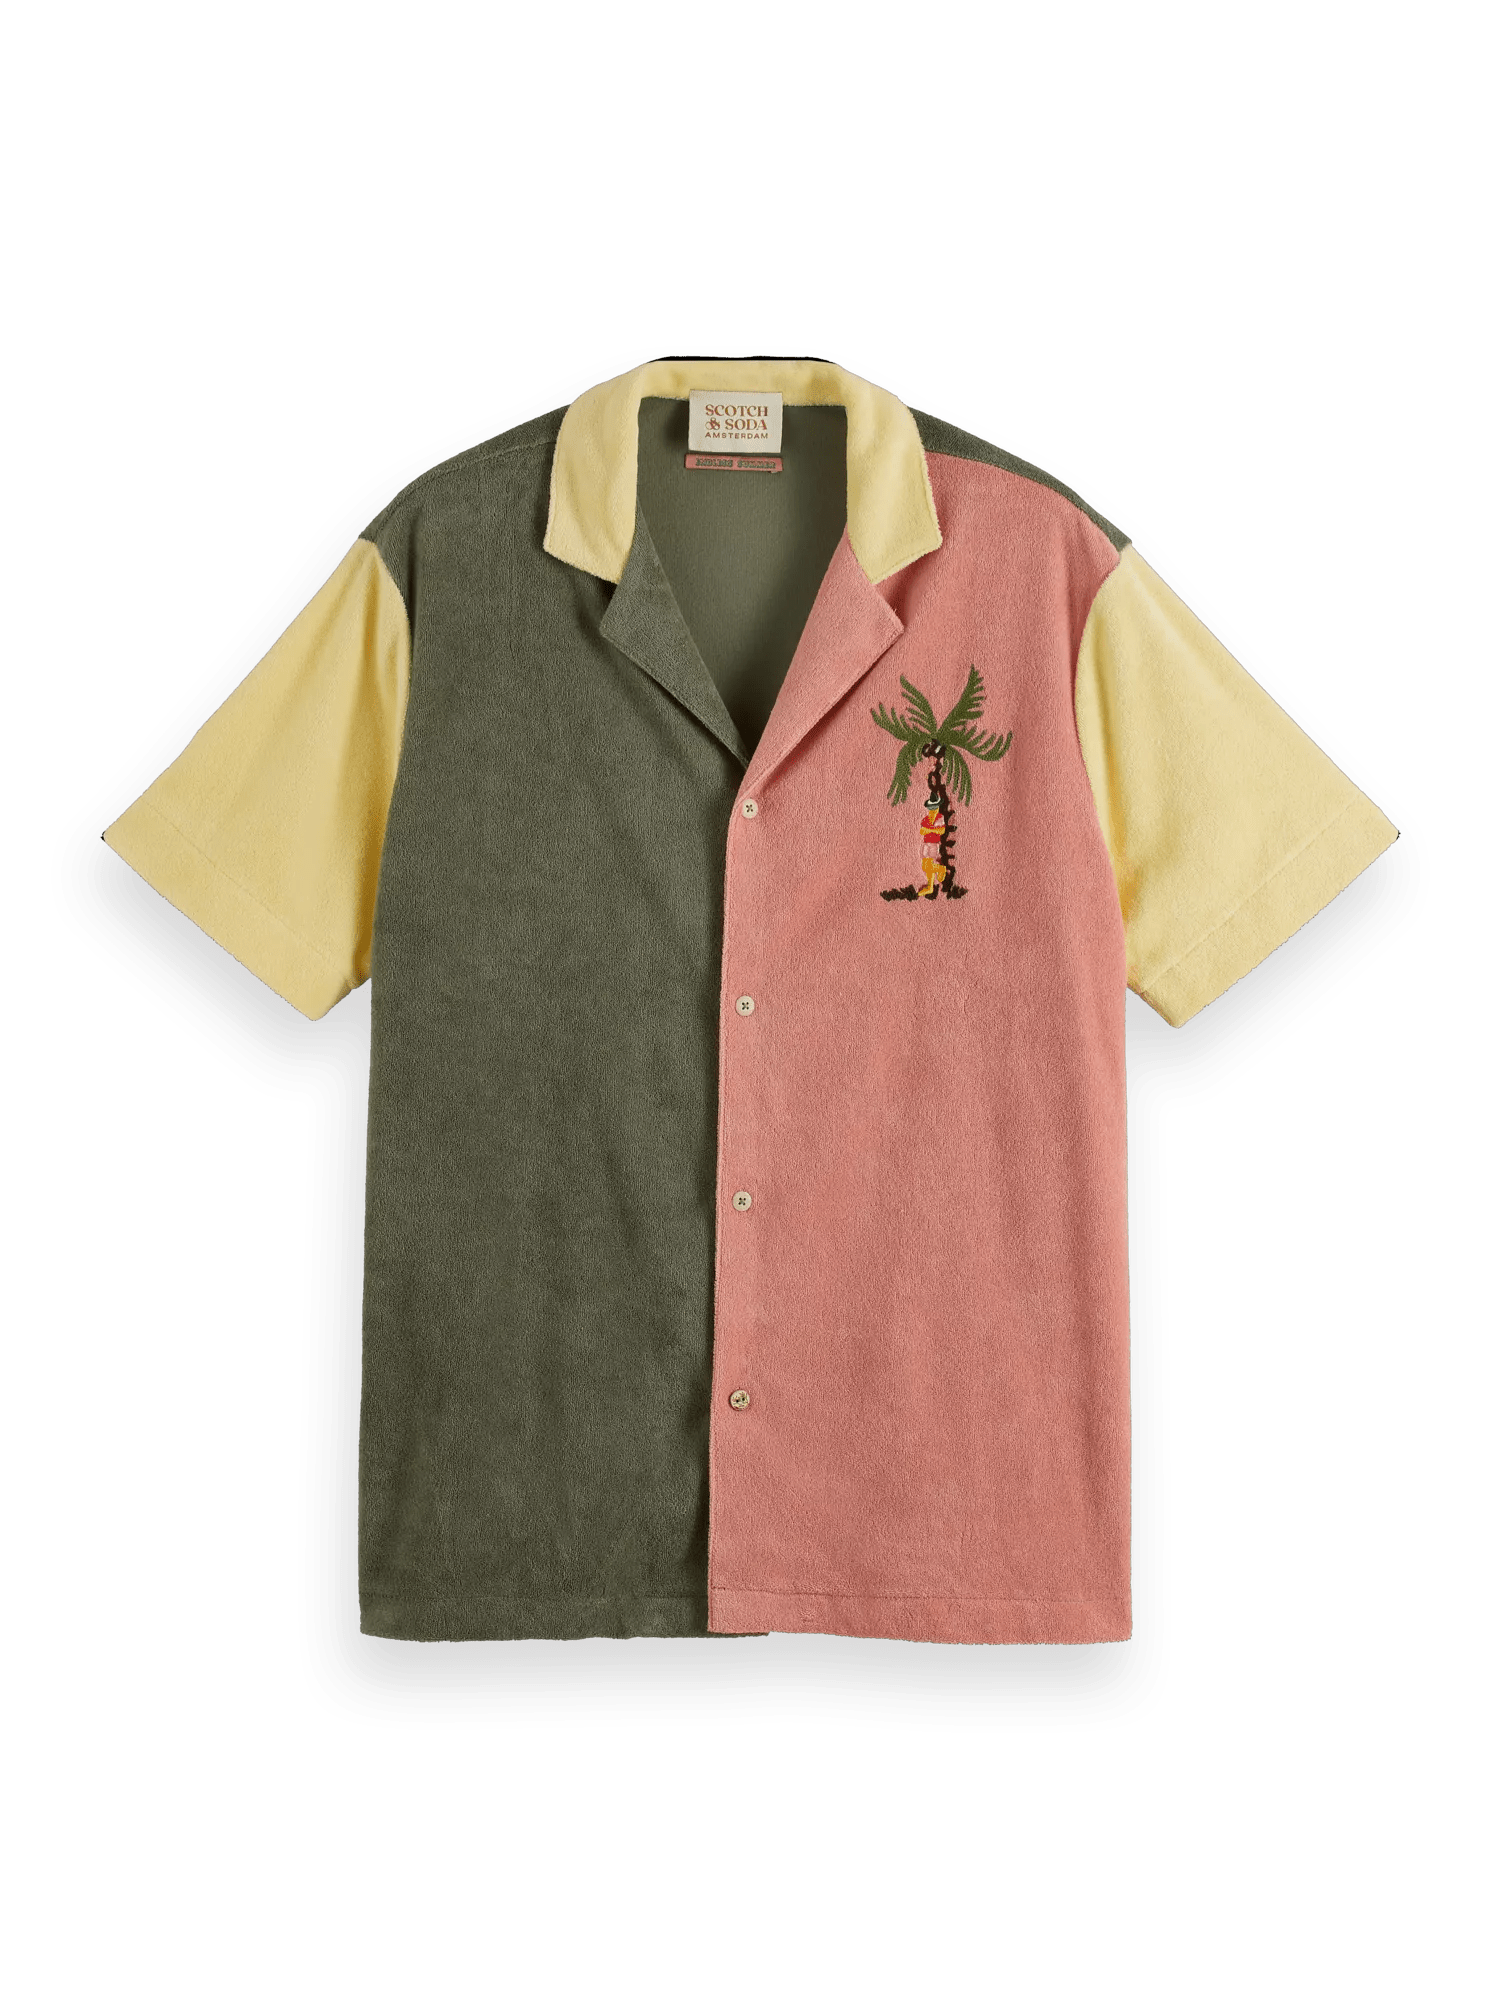 Scotch & Soda Toweling shirt with embroidery at chest FNT